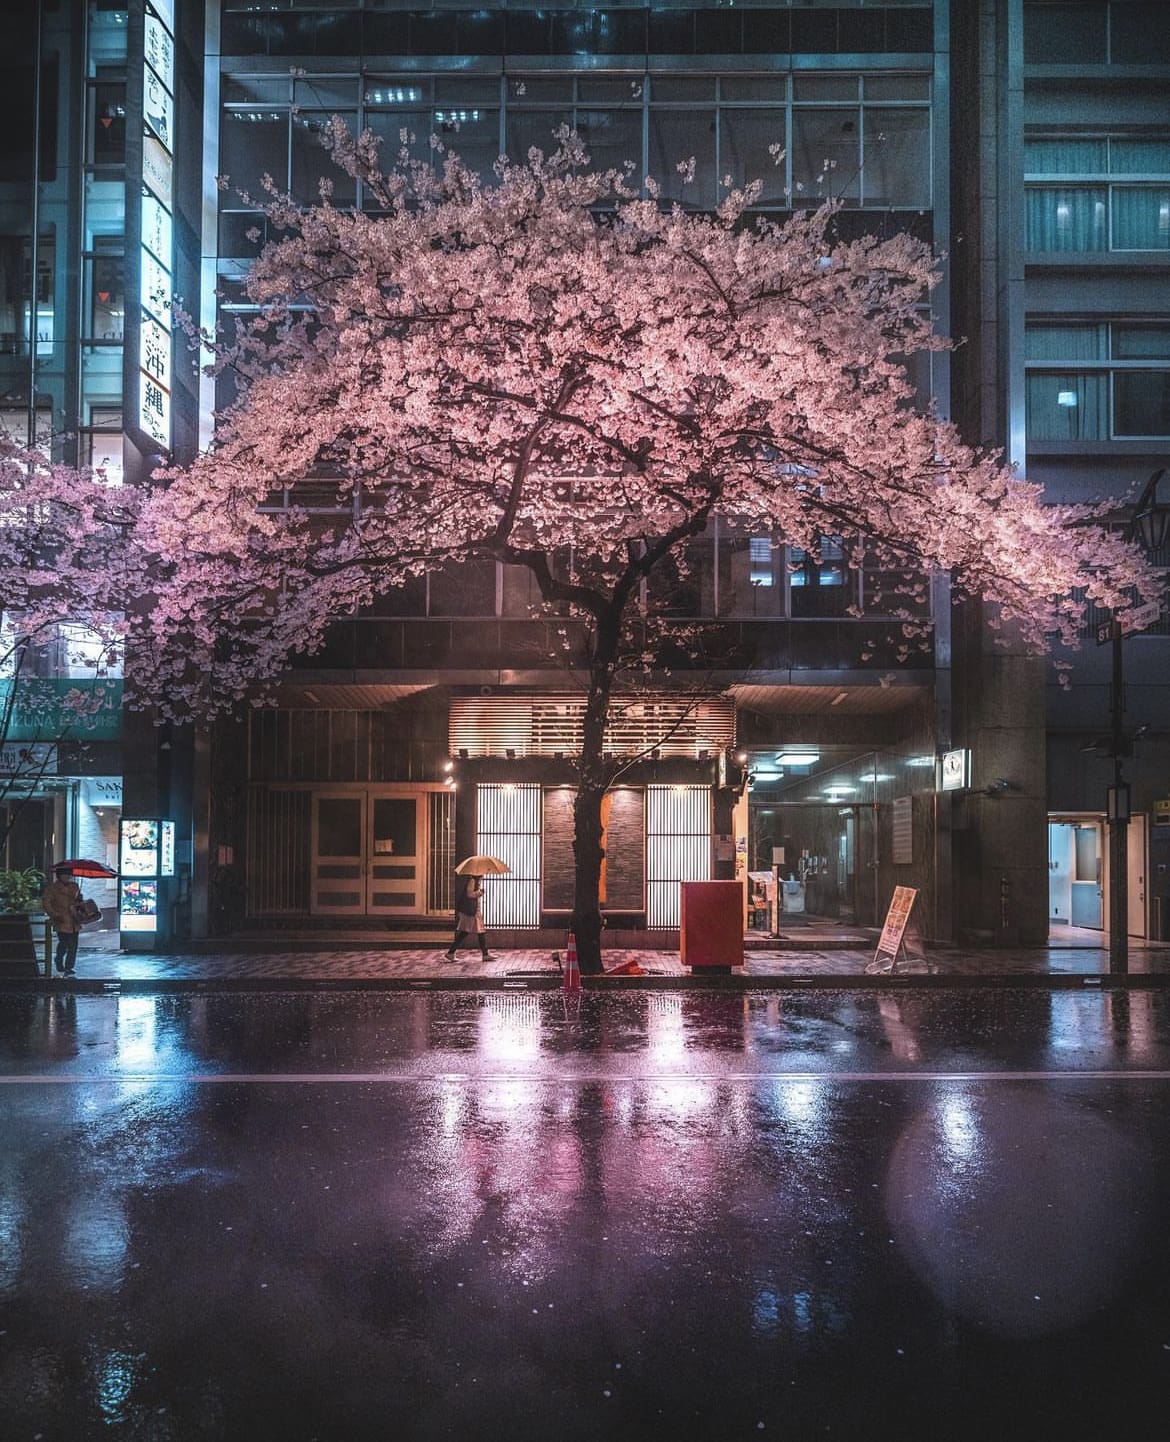 Cherry blossom tree, Tokyo - How To Spend 7 Days In Japan